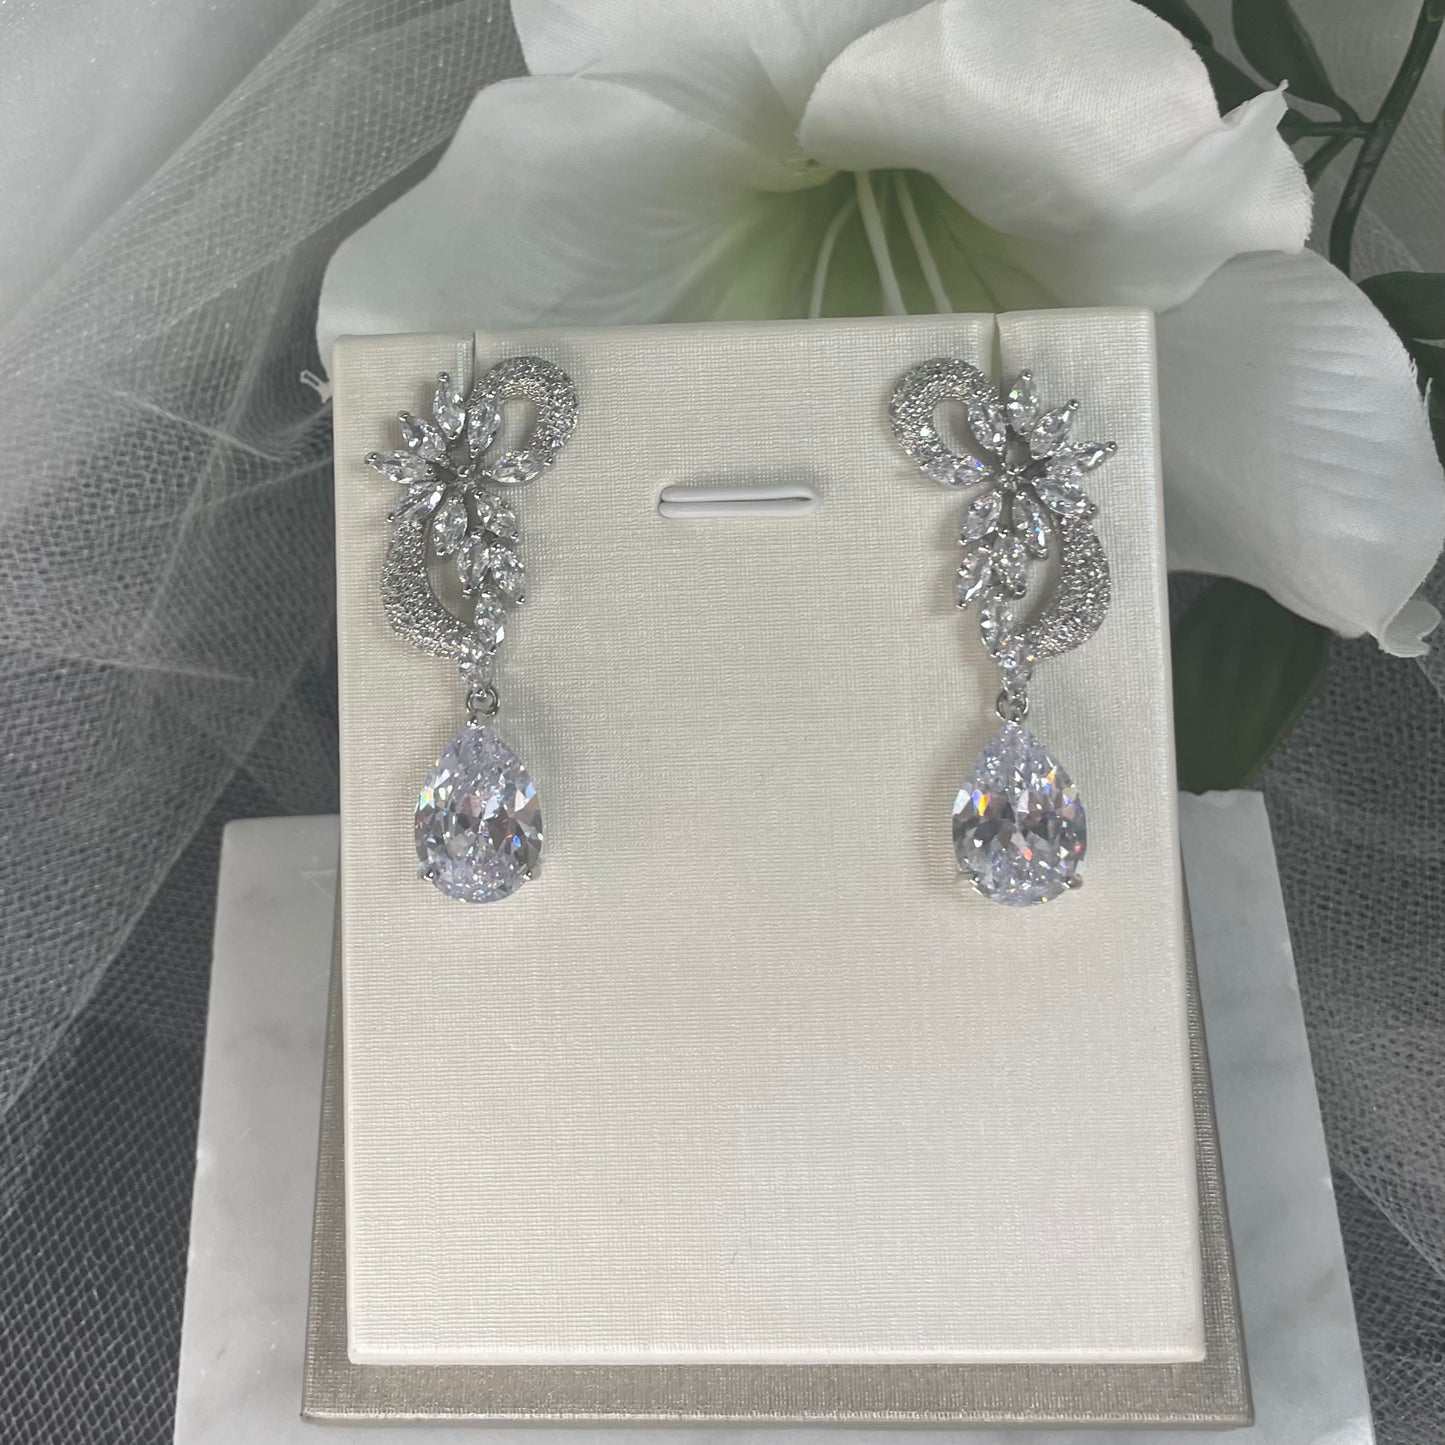 Ava Wedding Bridal Earrings with Silver Plated Zircon in Geometric Design - Divine Bridal